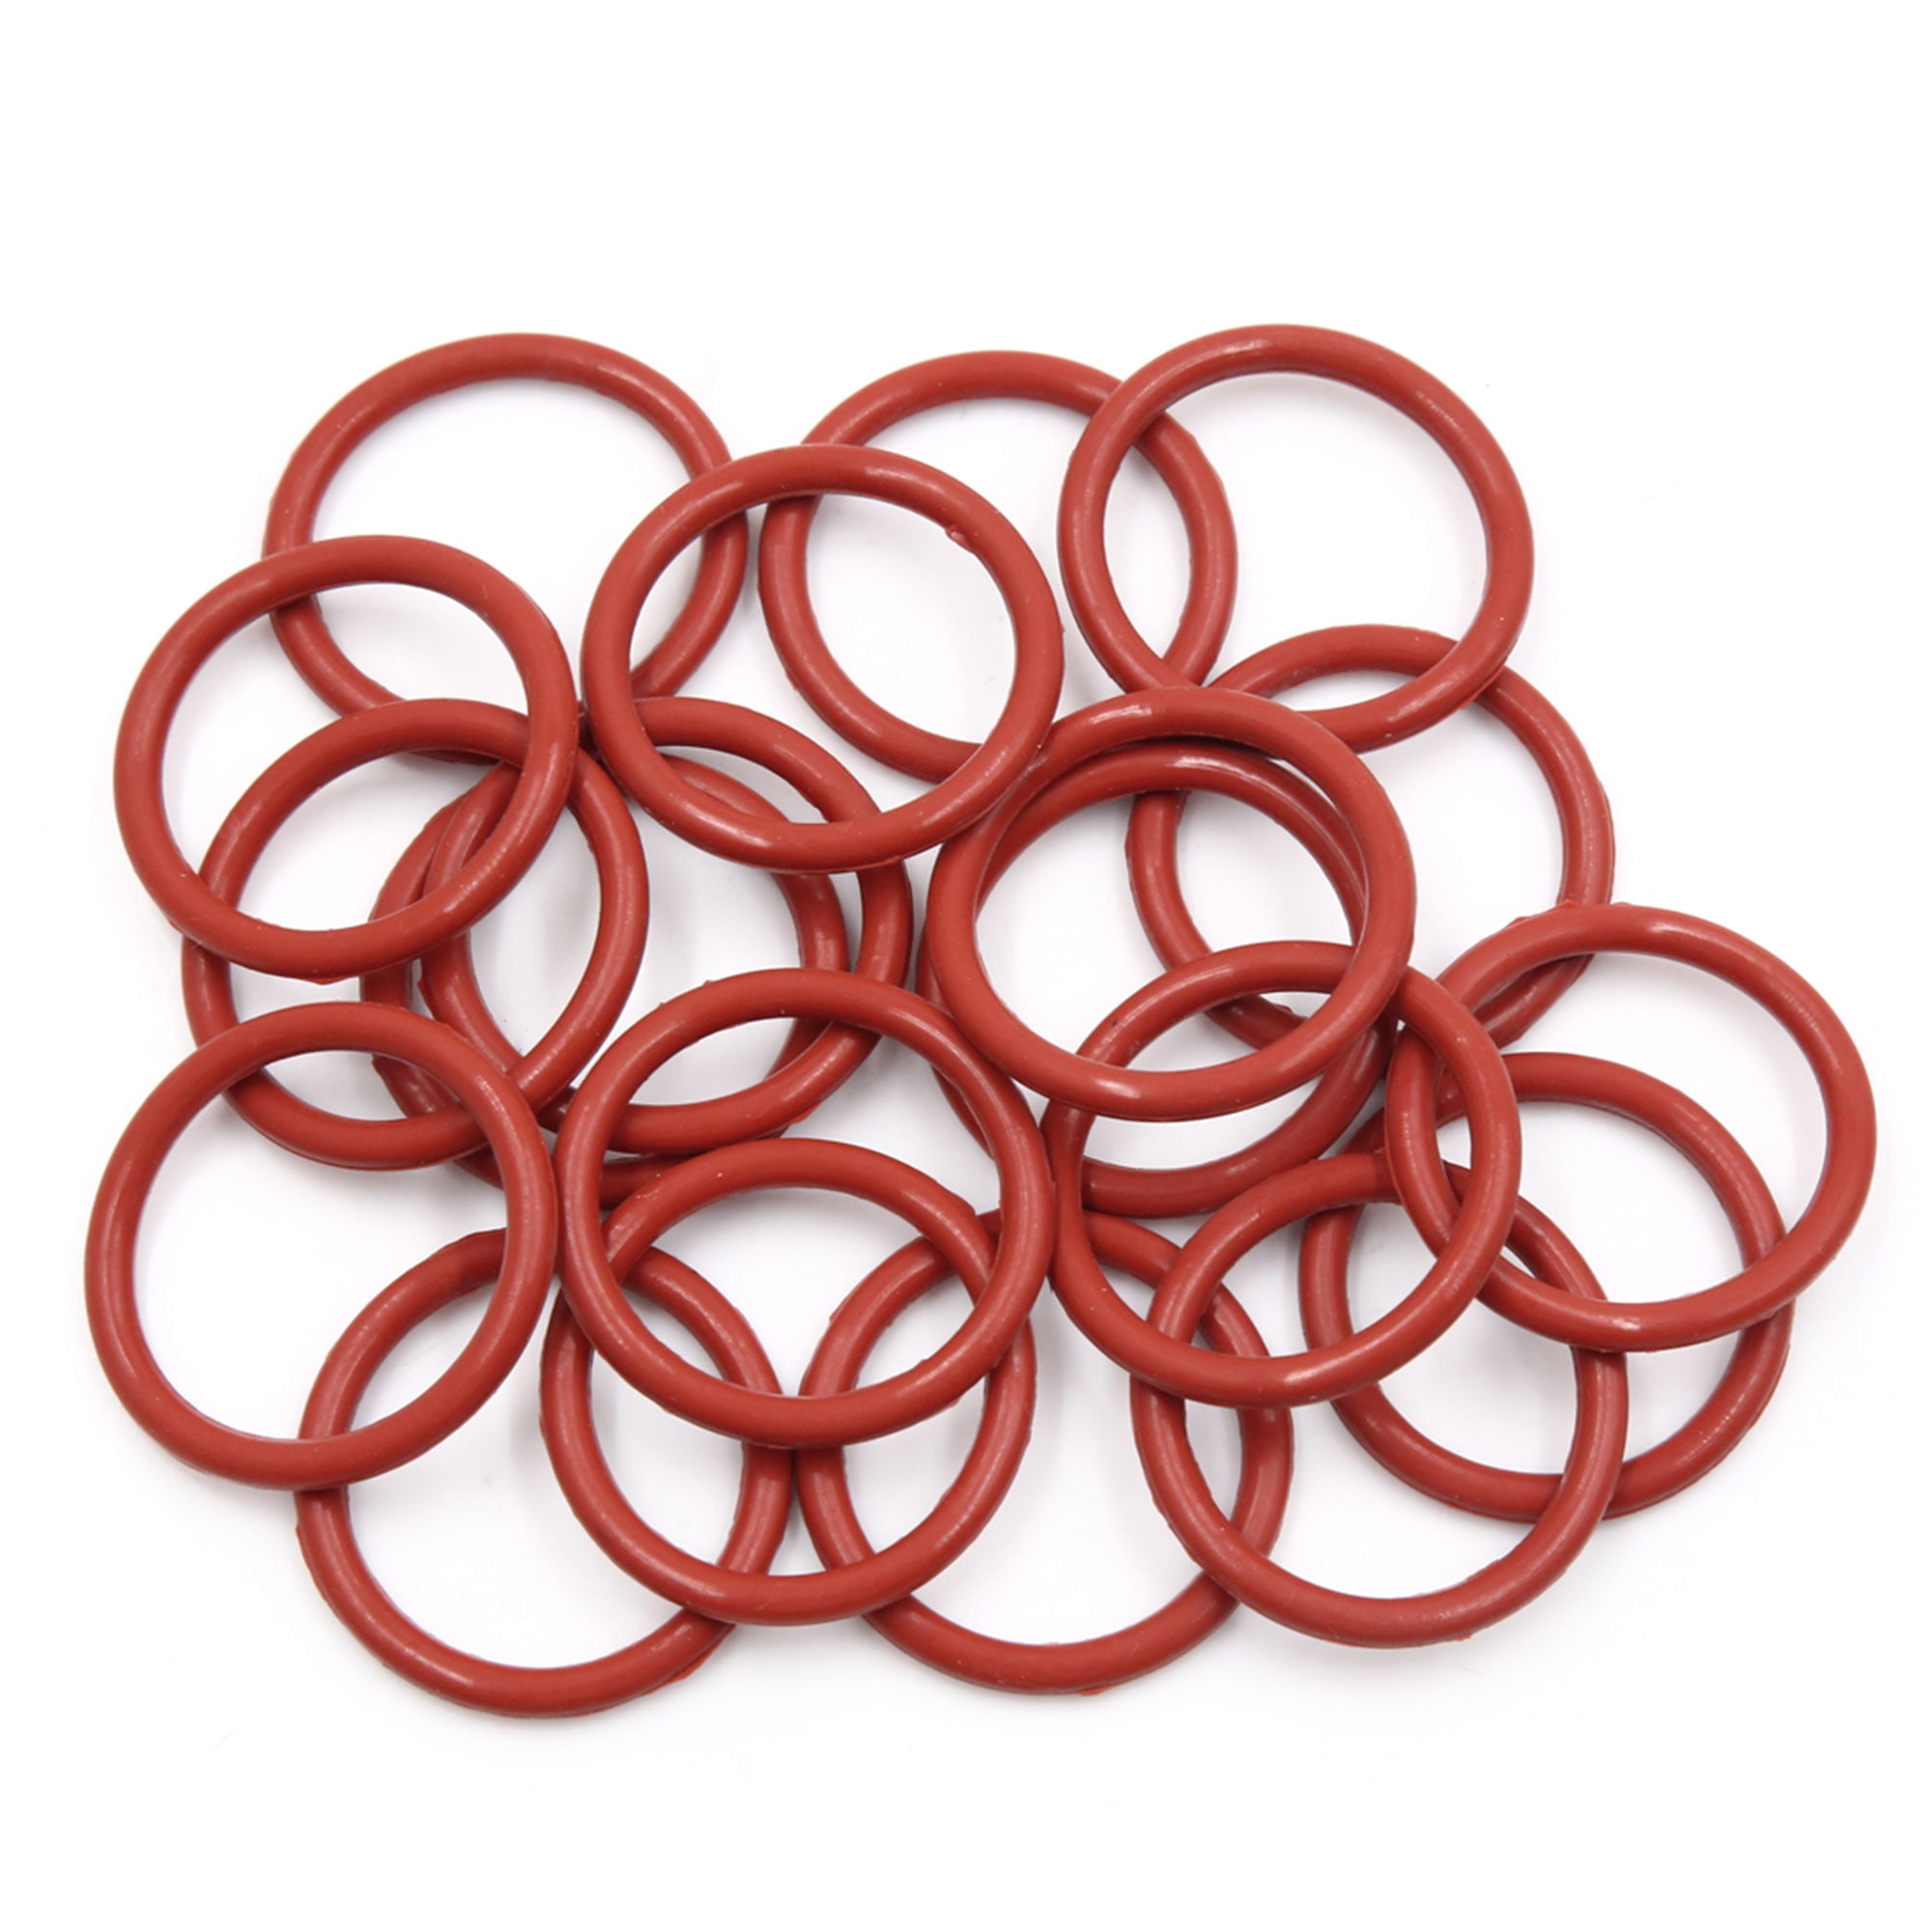 X AUTOHAUX 20pcs Silicone Rubber O-Ring VMQ Seal Gasket for Car 40mm x 4mm 